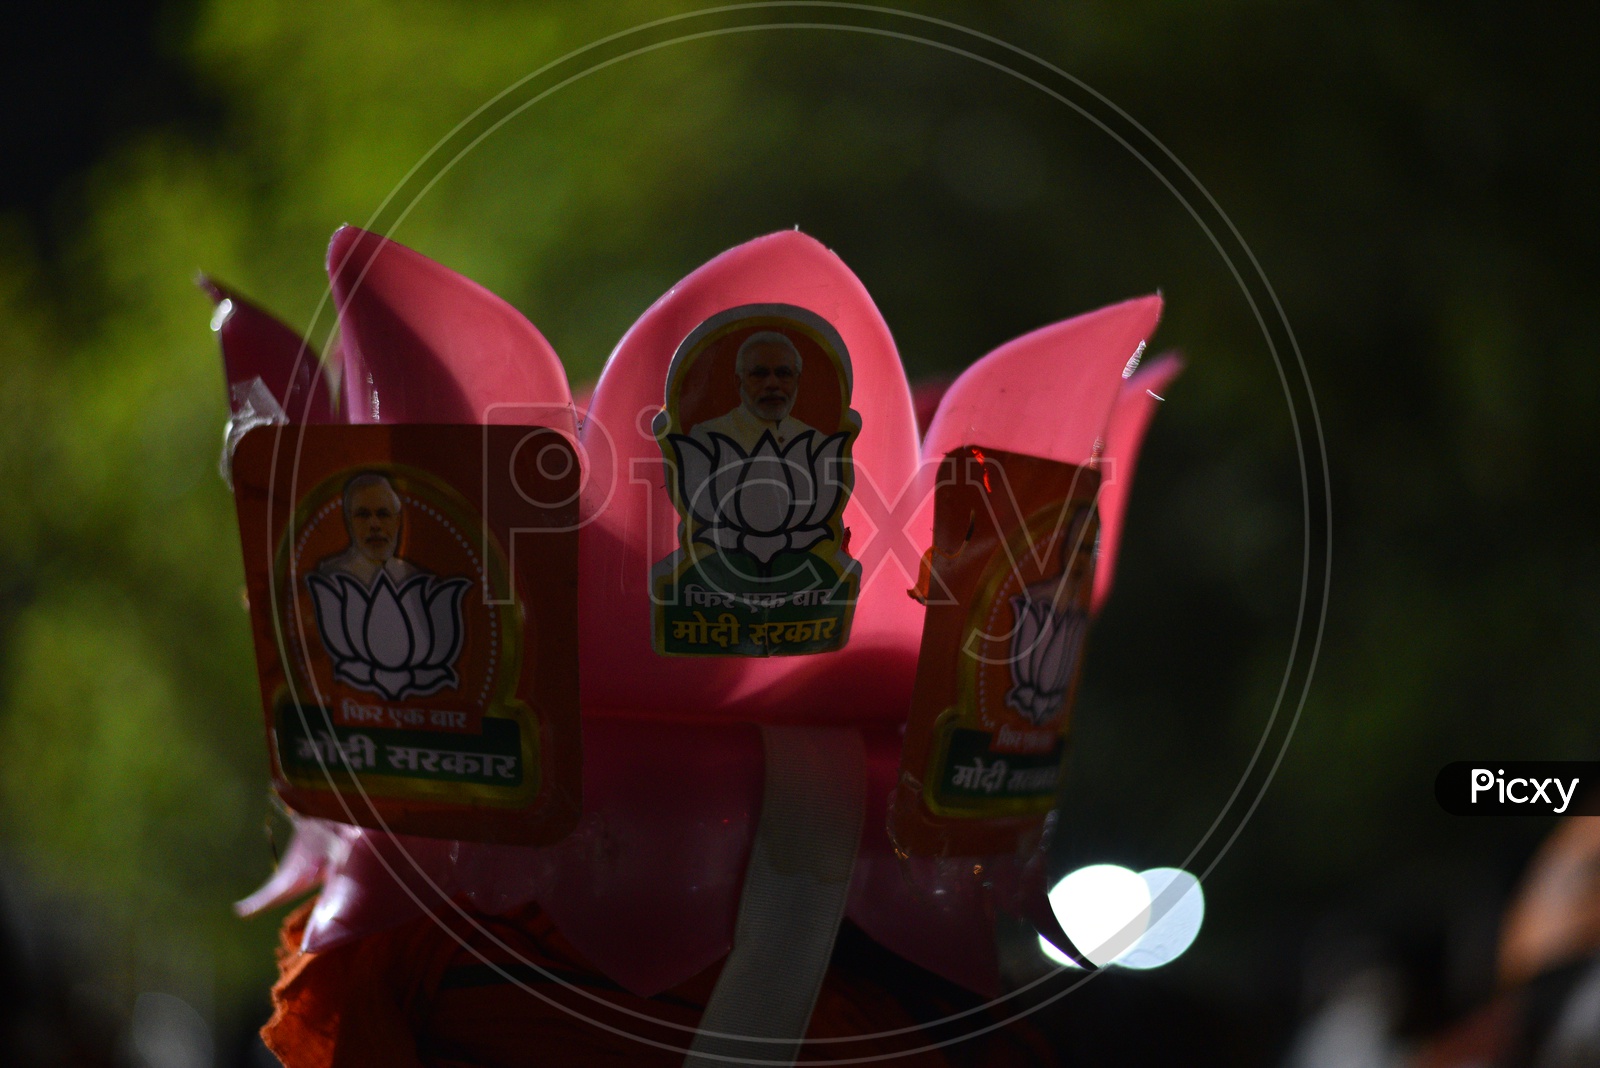 BJP Party Flags In Election Campaign for Lok Sabha Election 2019